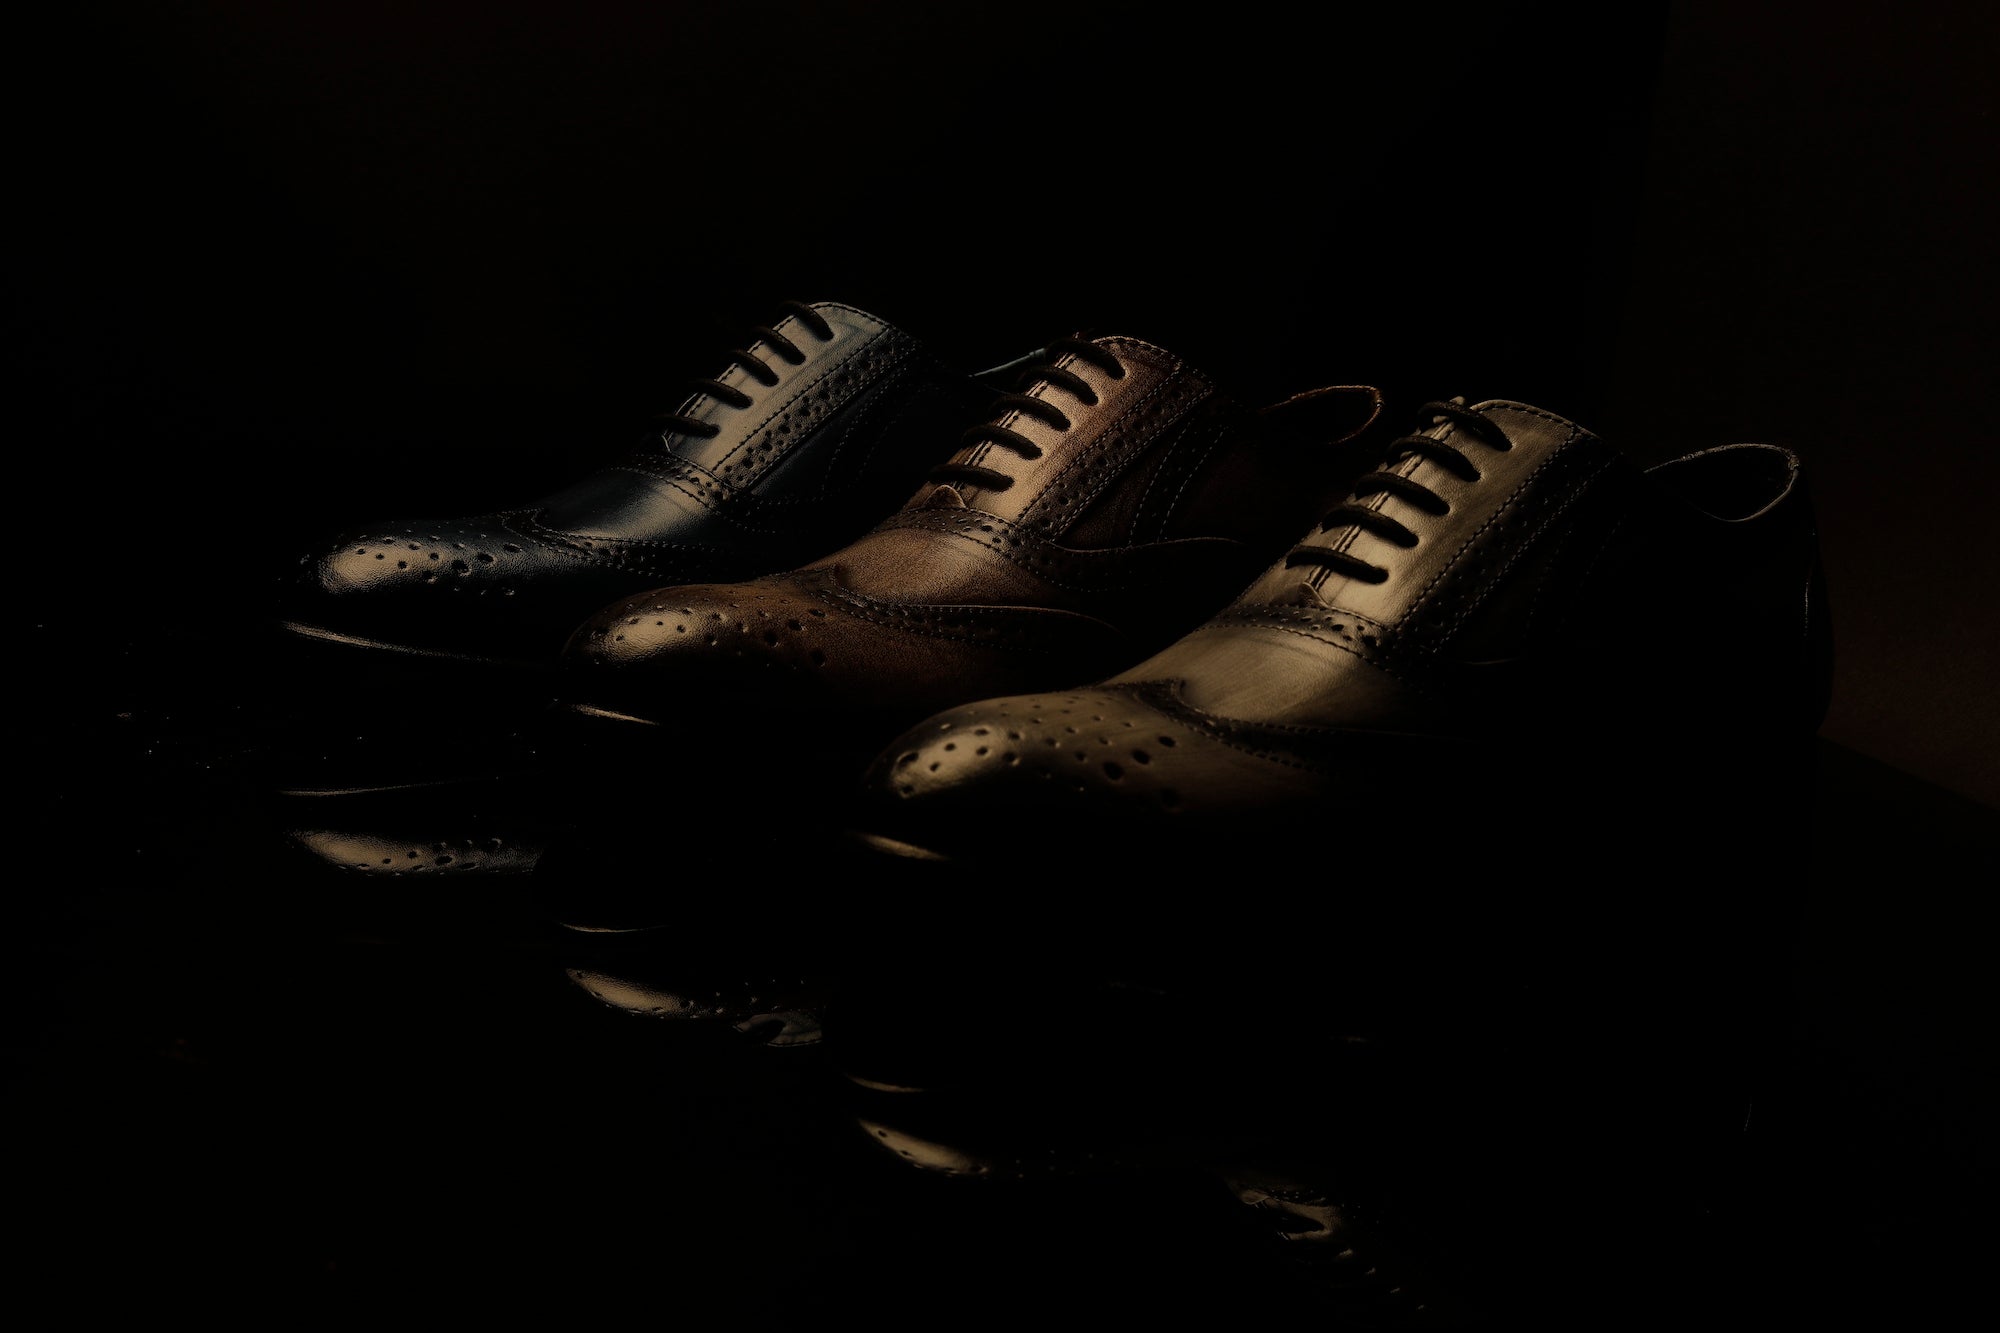 A pair of black shoes on a black background.